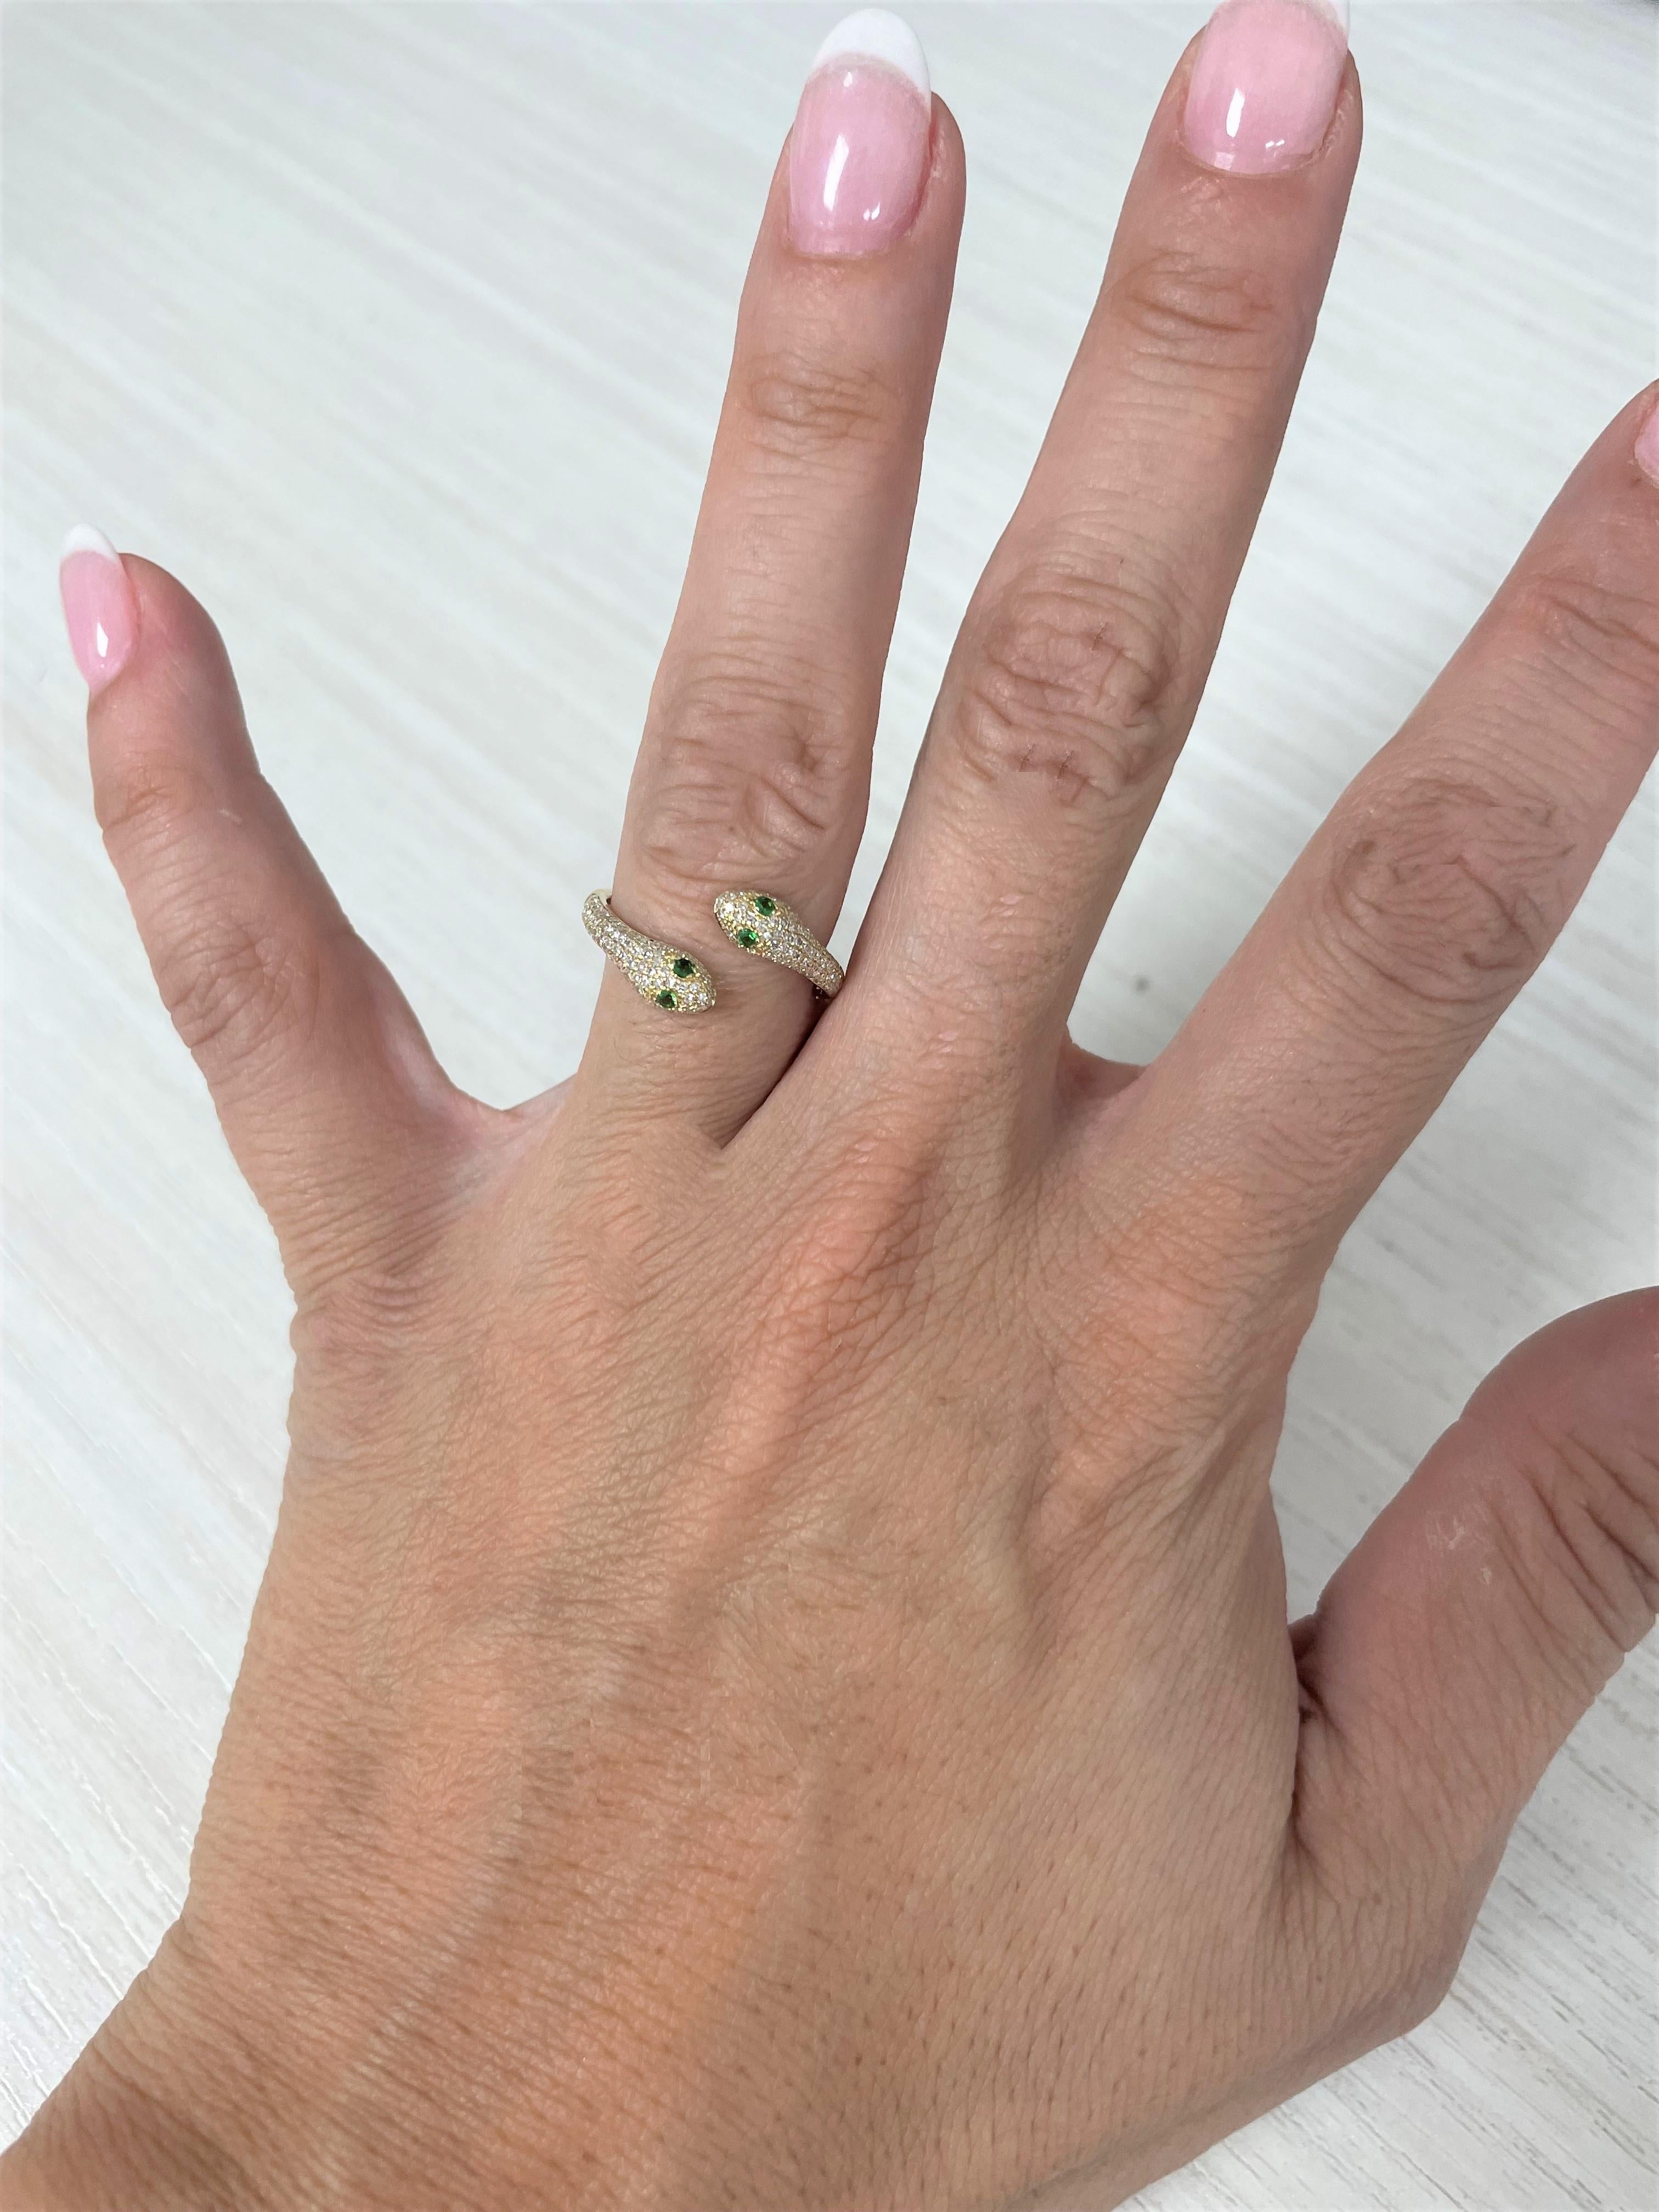 This Stunning and Charismatic Snake ring is crafted of 14K Gold and features approximately 0.35 ct. of Diamonds and 4 Tsavorites approximately 0.06 ct. Available in your choice of Yellow or Rose Gold. Wraps Gracefully around your finger for that